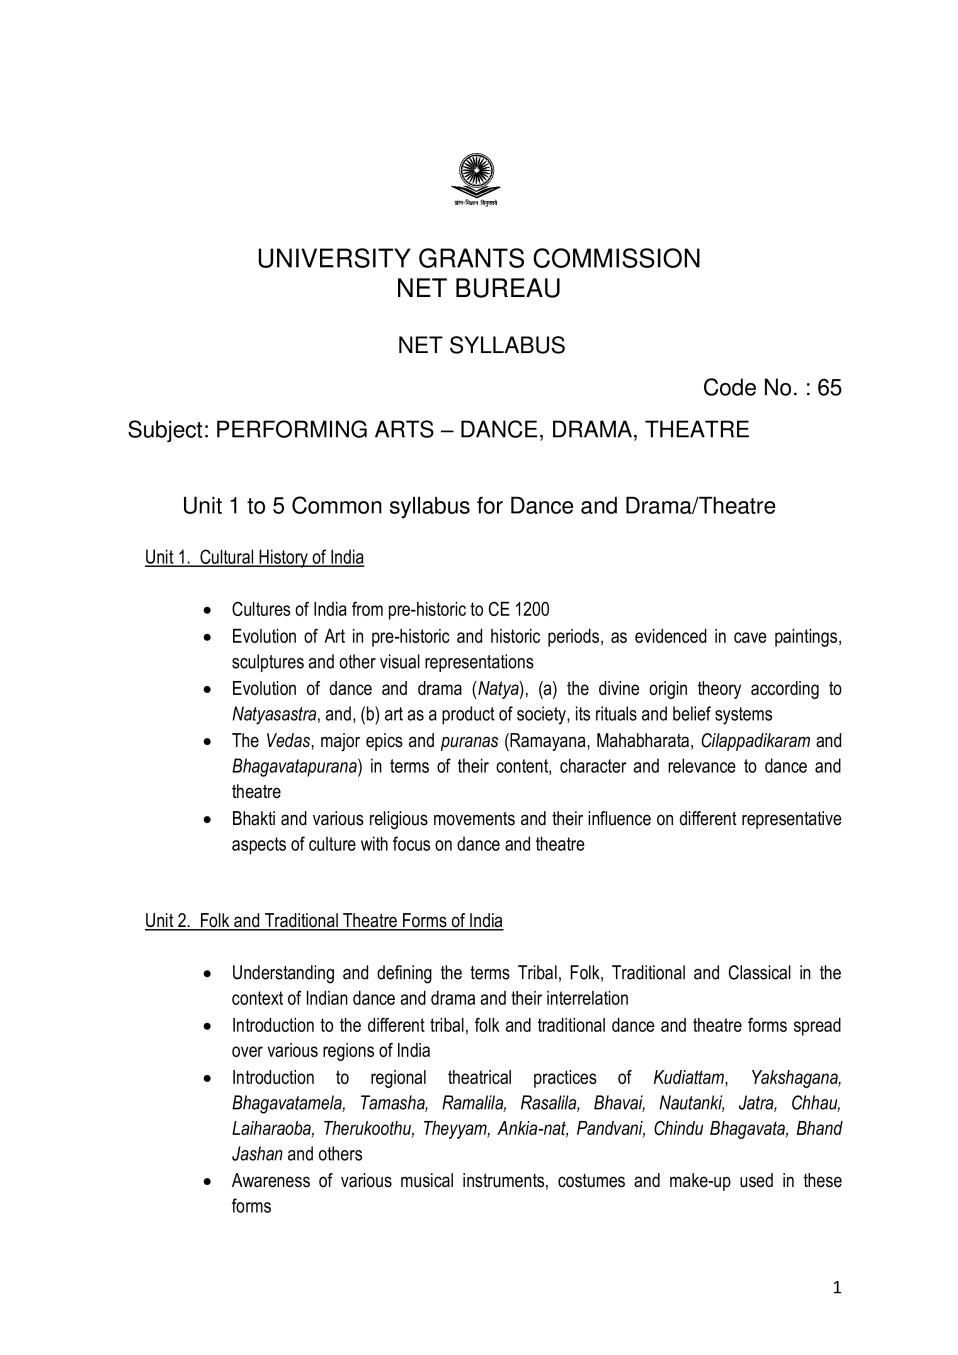 UGC NET Syllabus for Performing Art - Dance Drama Theatre 2020 - Page 1